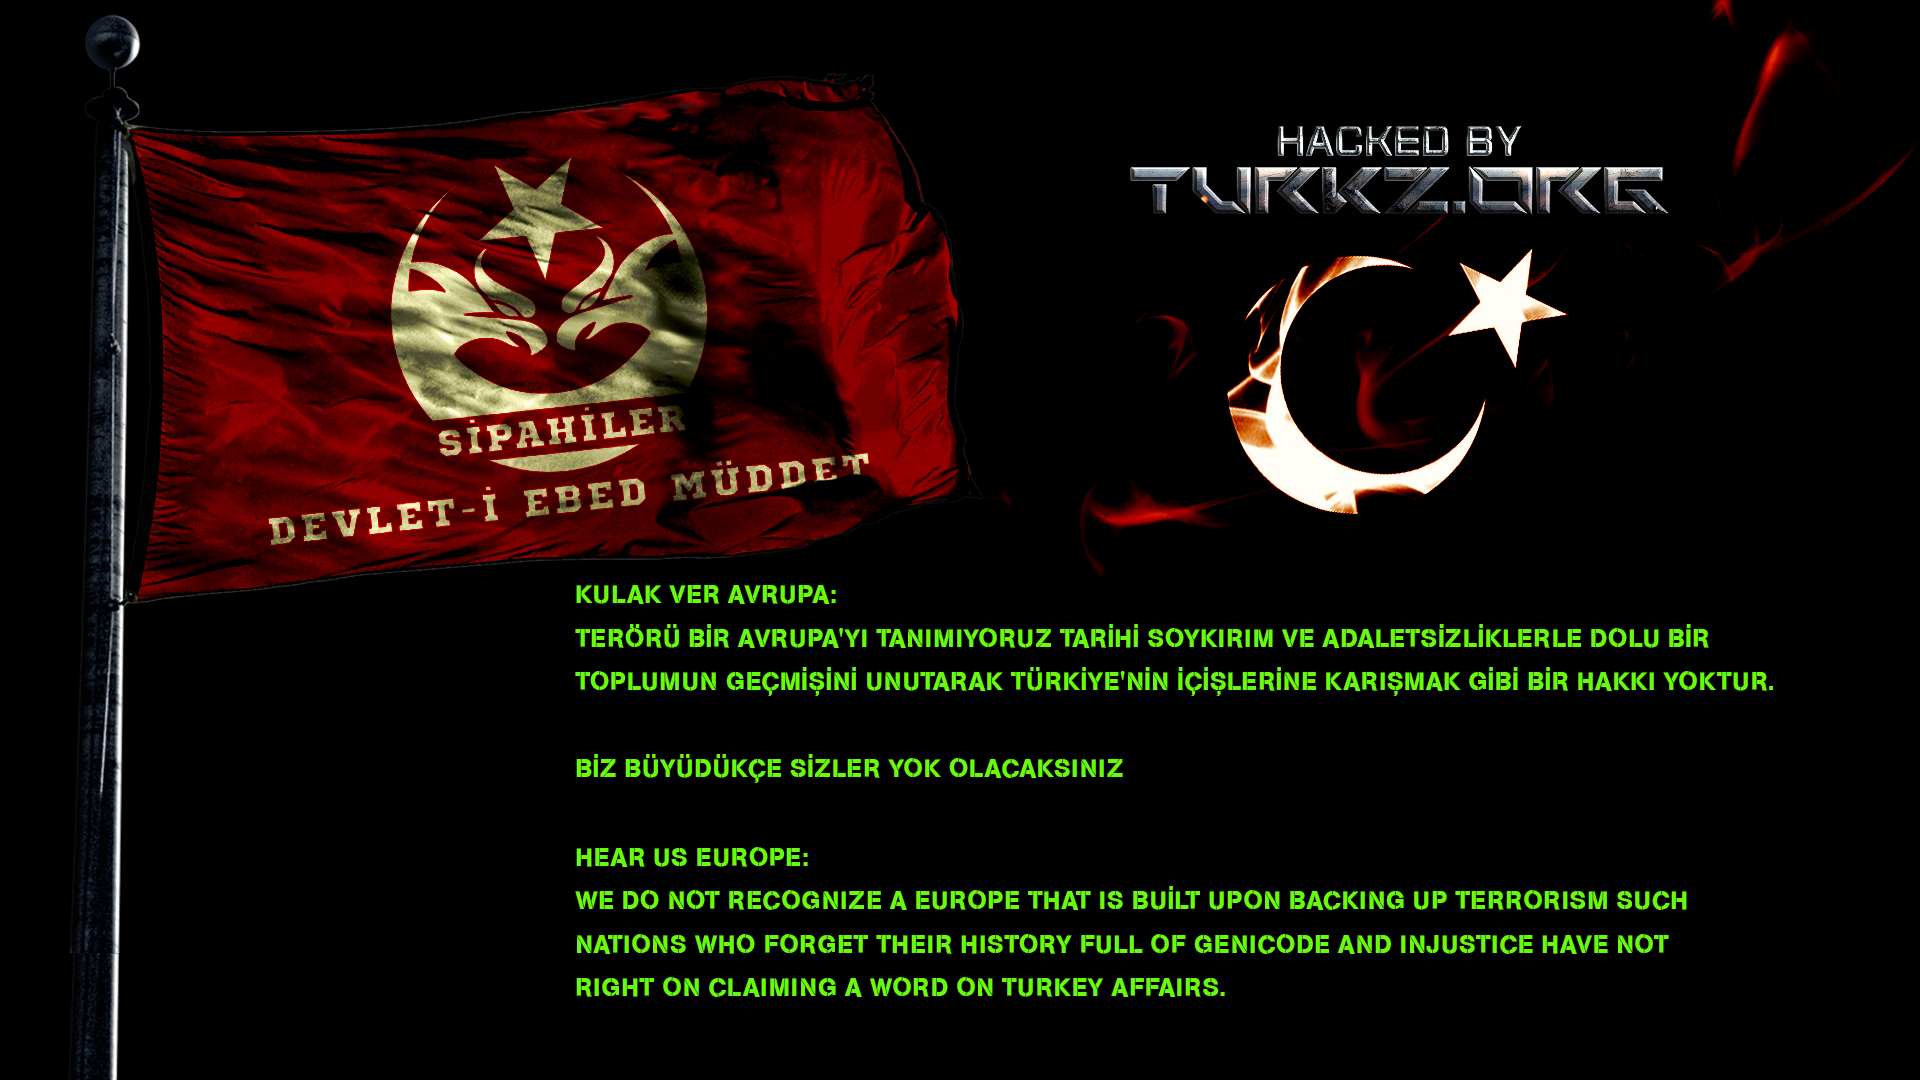 Hacked By SipahileR  TurkZ.org